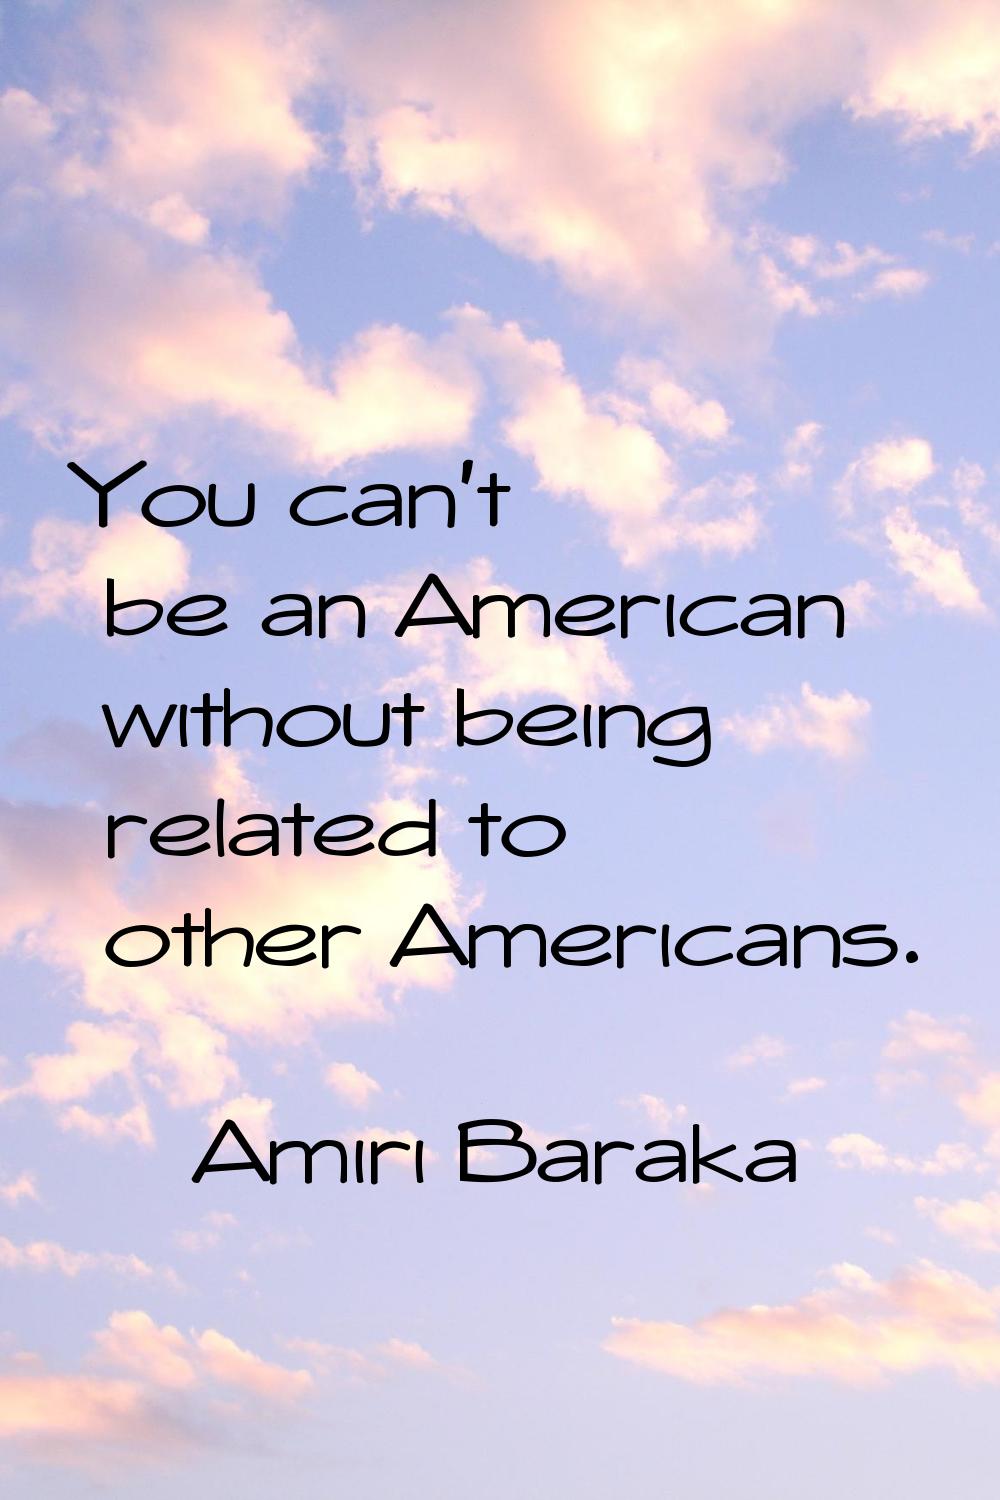 You can't be an American without being related to other Americans.